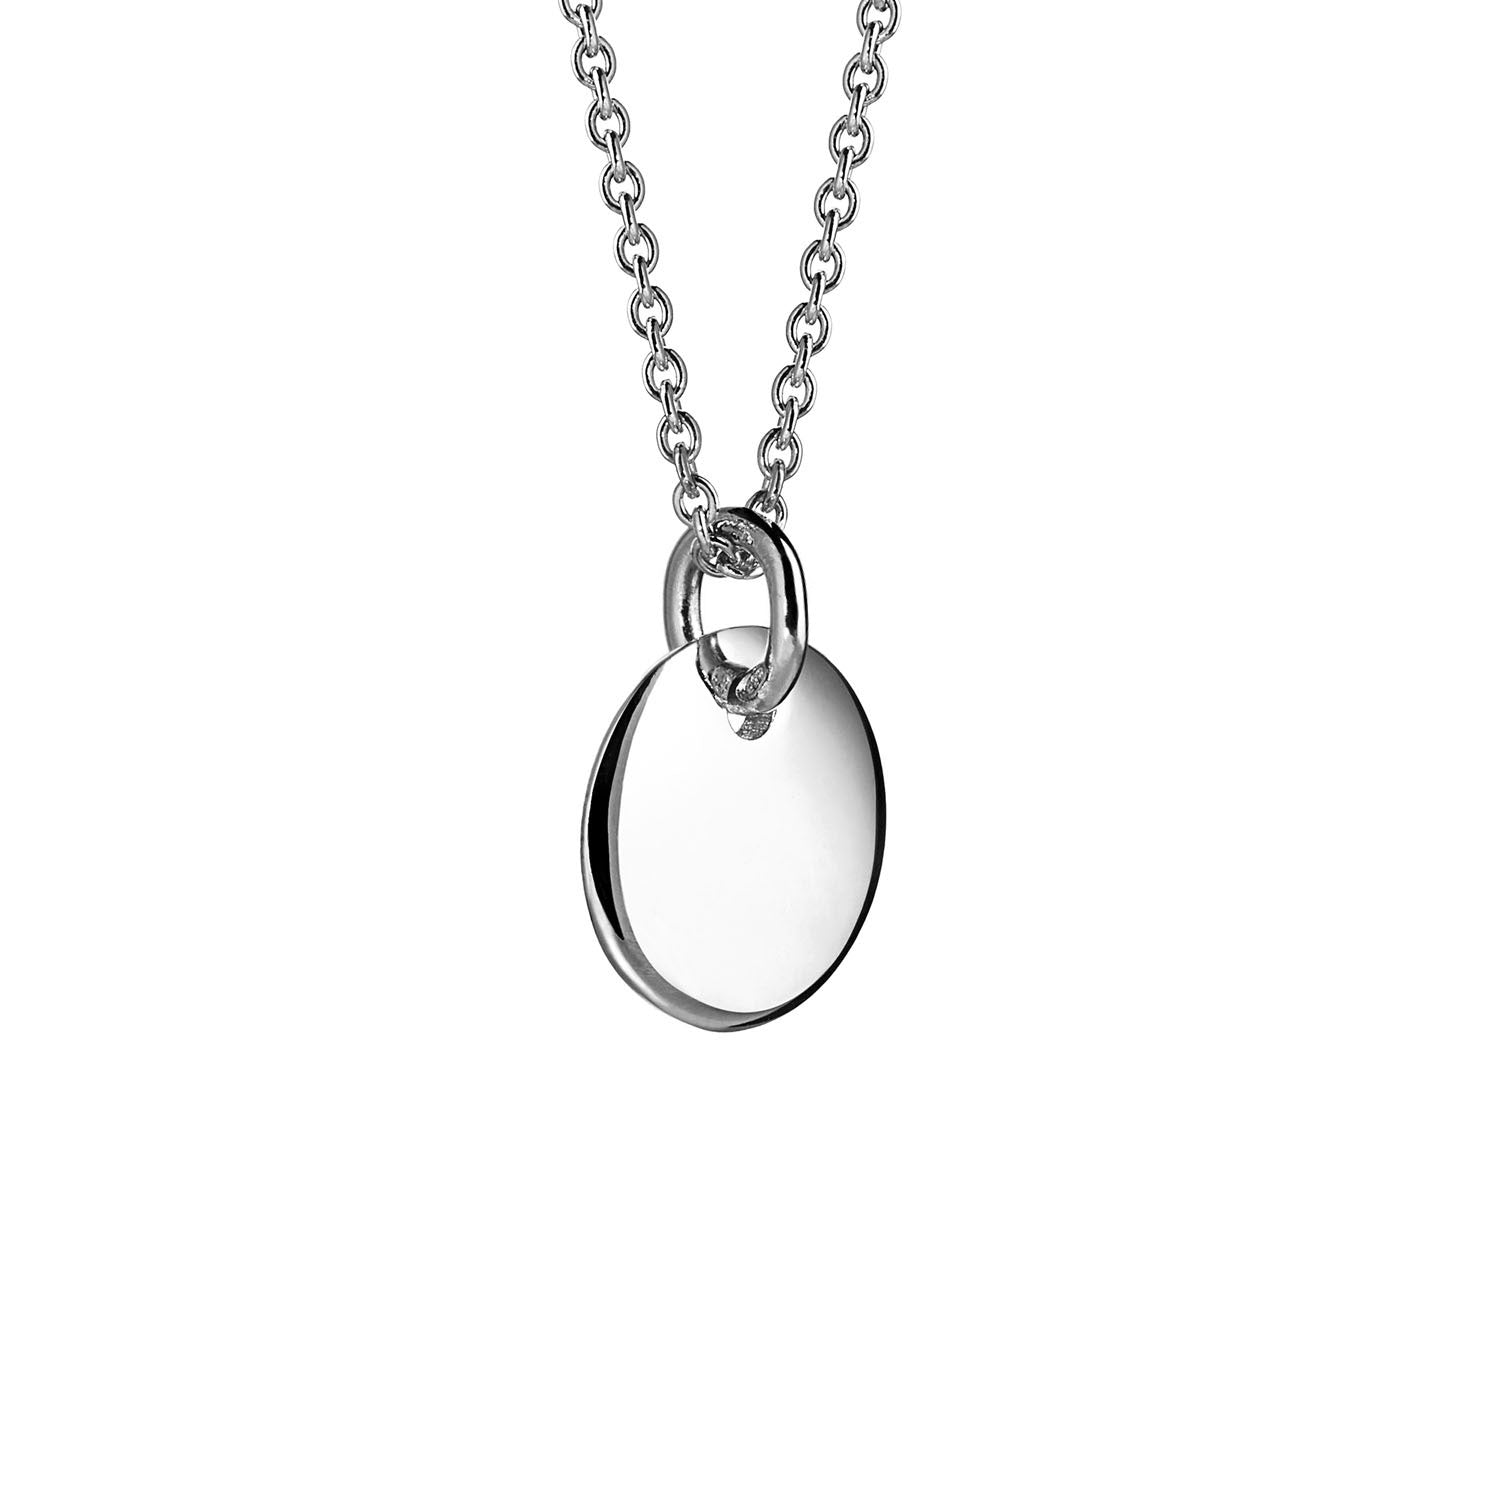 Smooth disk pendant necklace